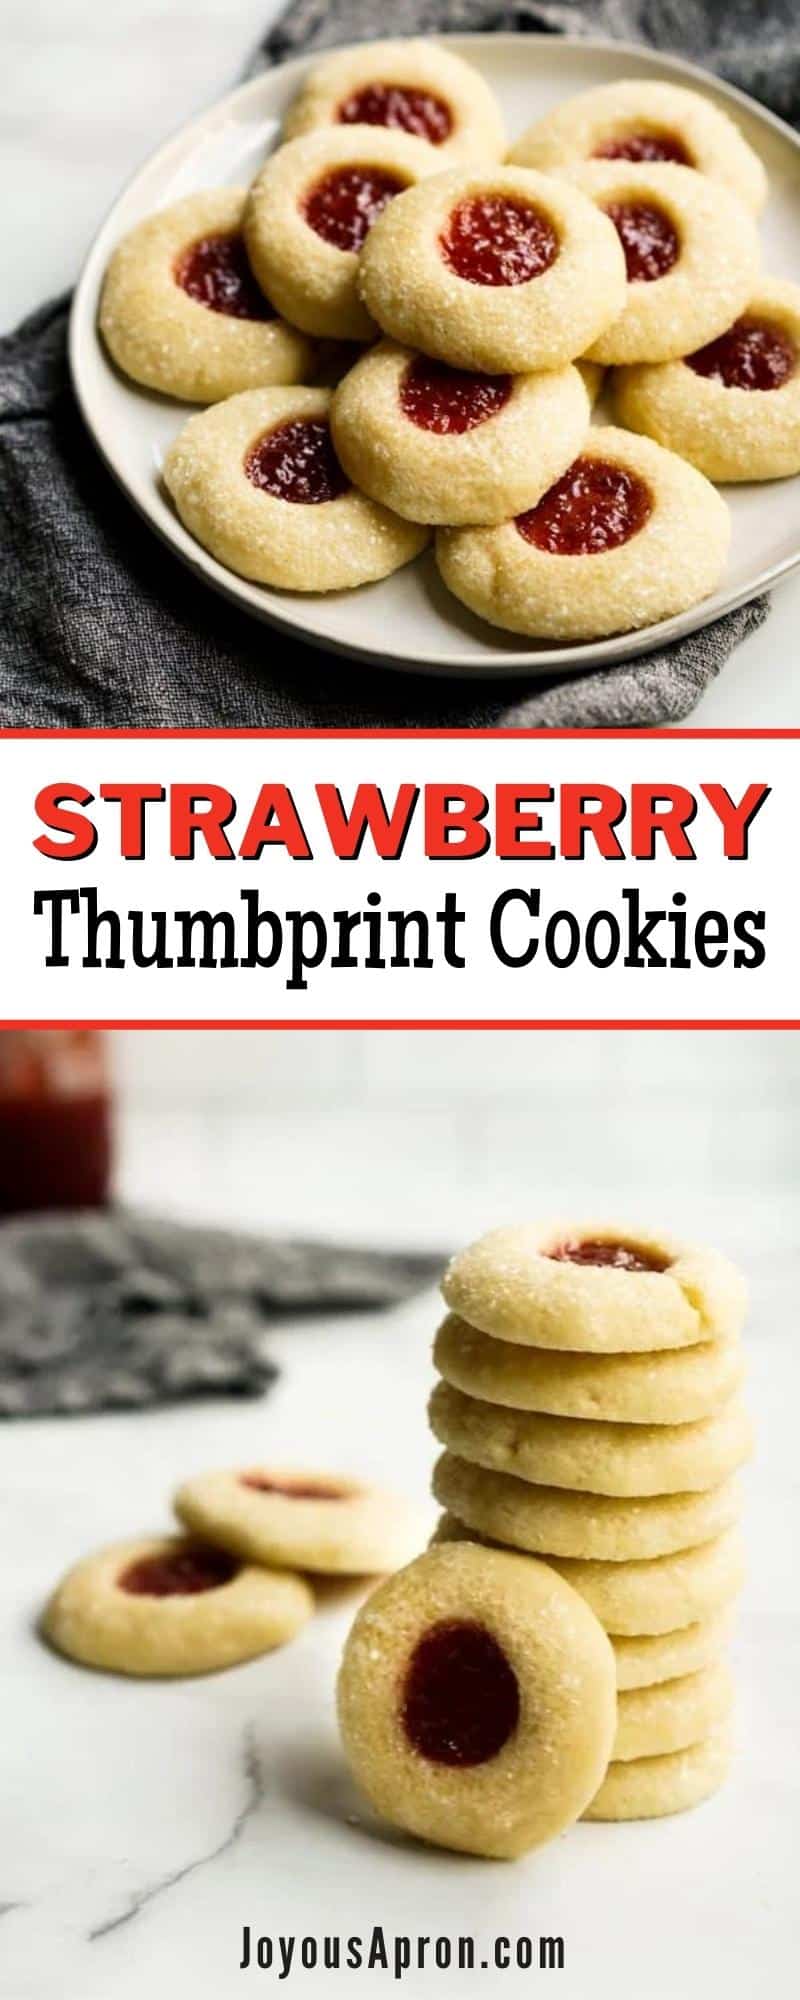 Strawberry Thumbprint Cookies - buttery and moist shortbread thumbprint cookies topped with sugar crystals and filled with strawberry jam. A delicious sweet treat and dessert! via @joyousapron